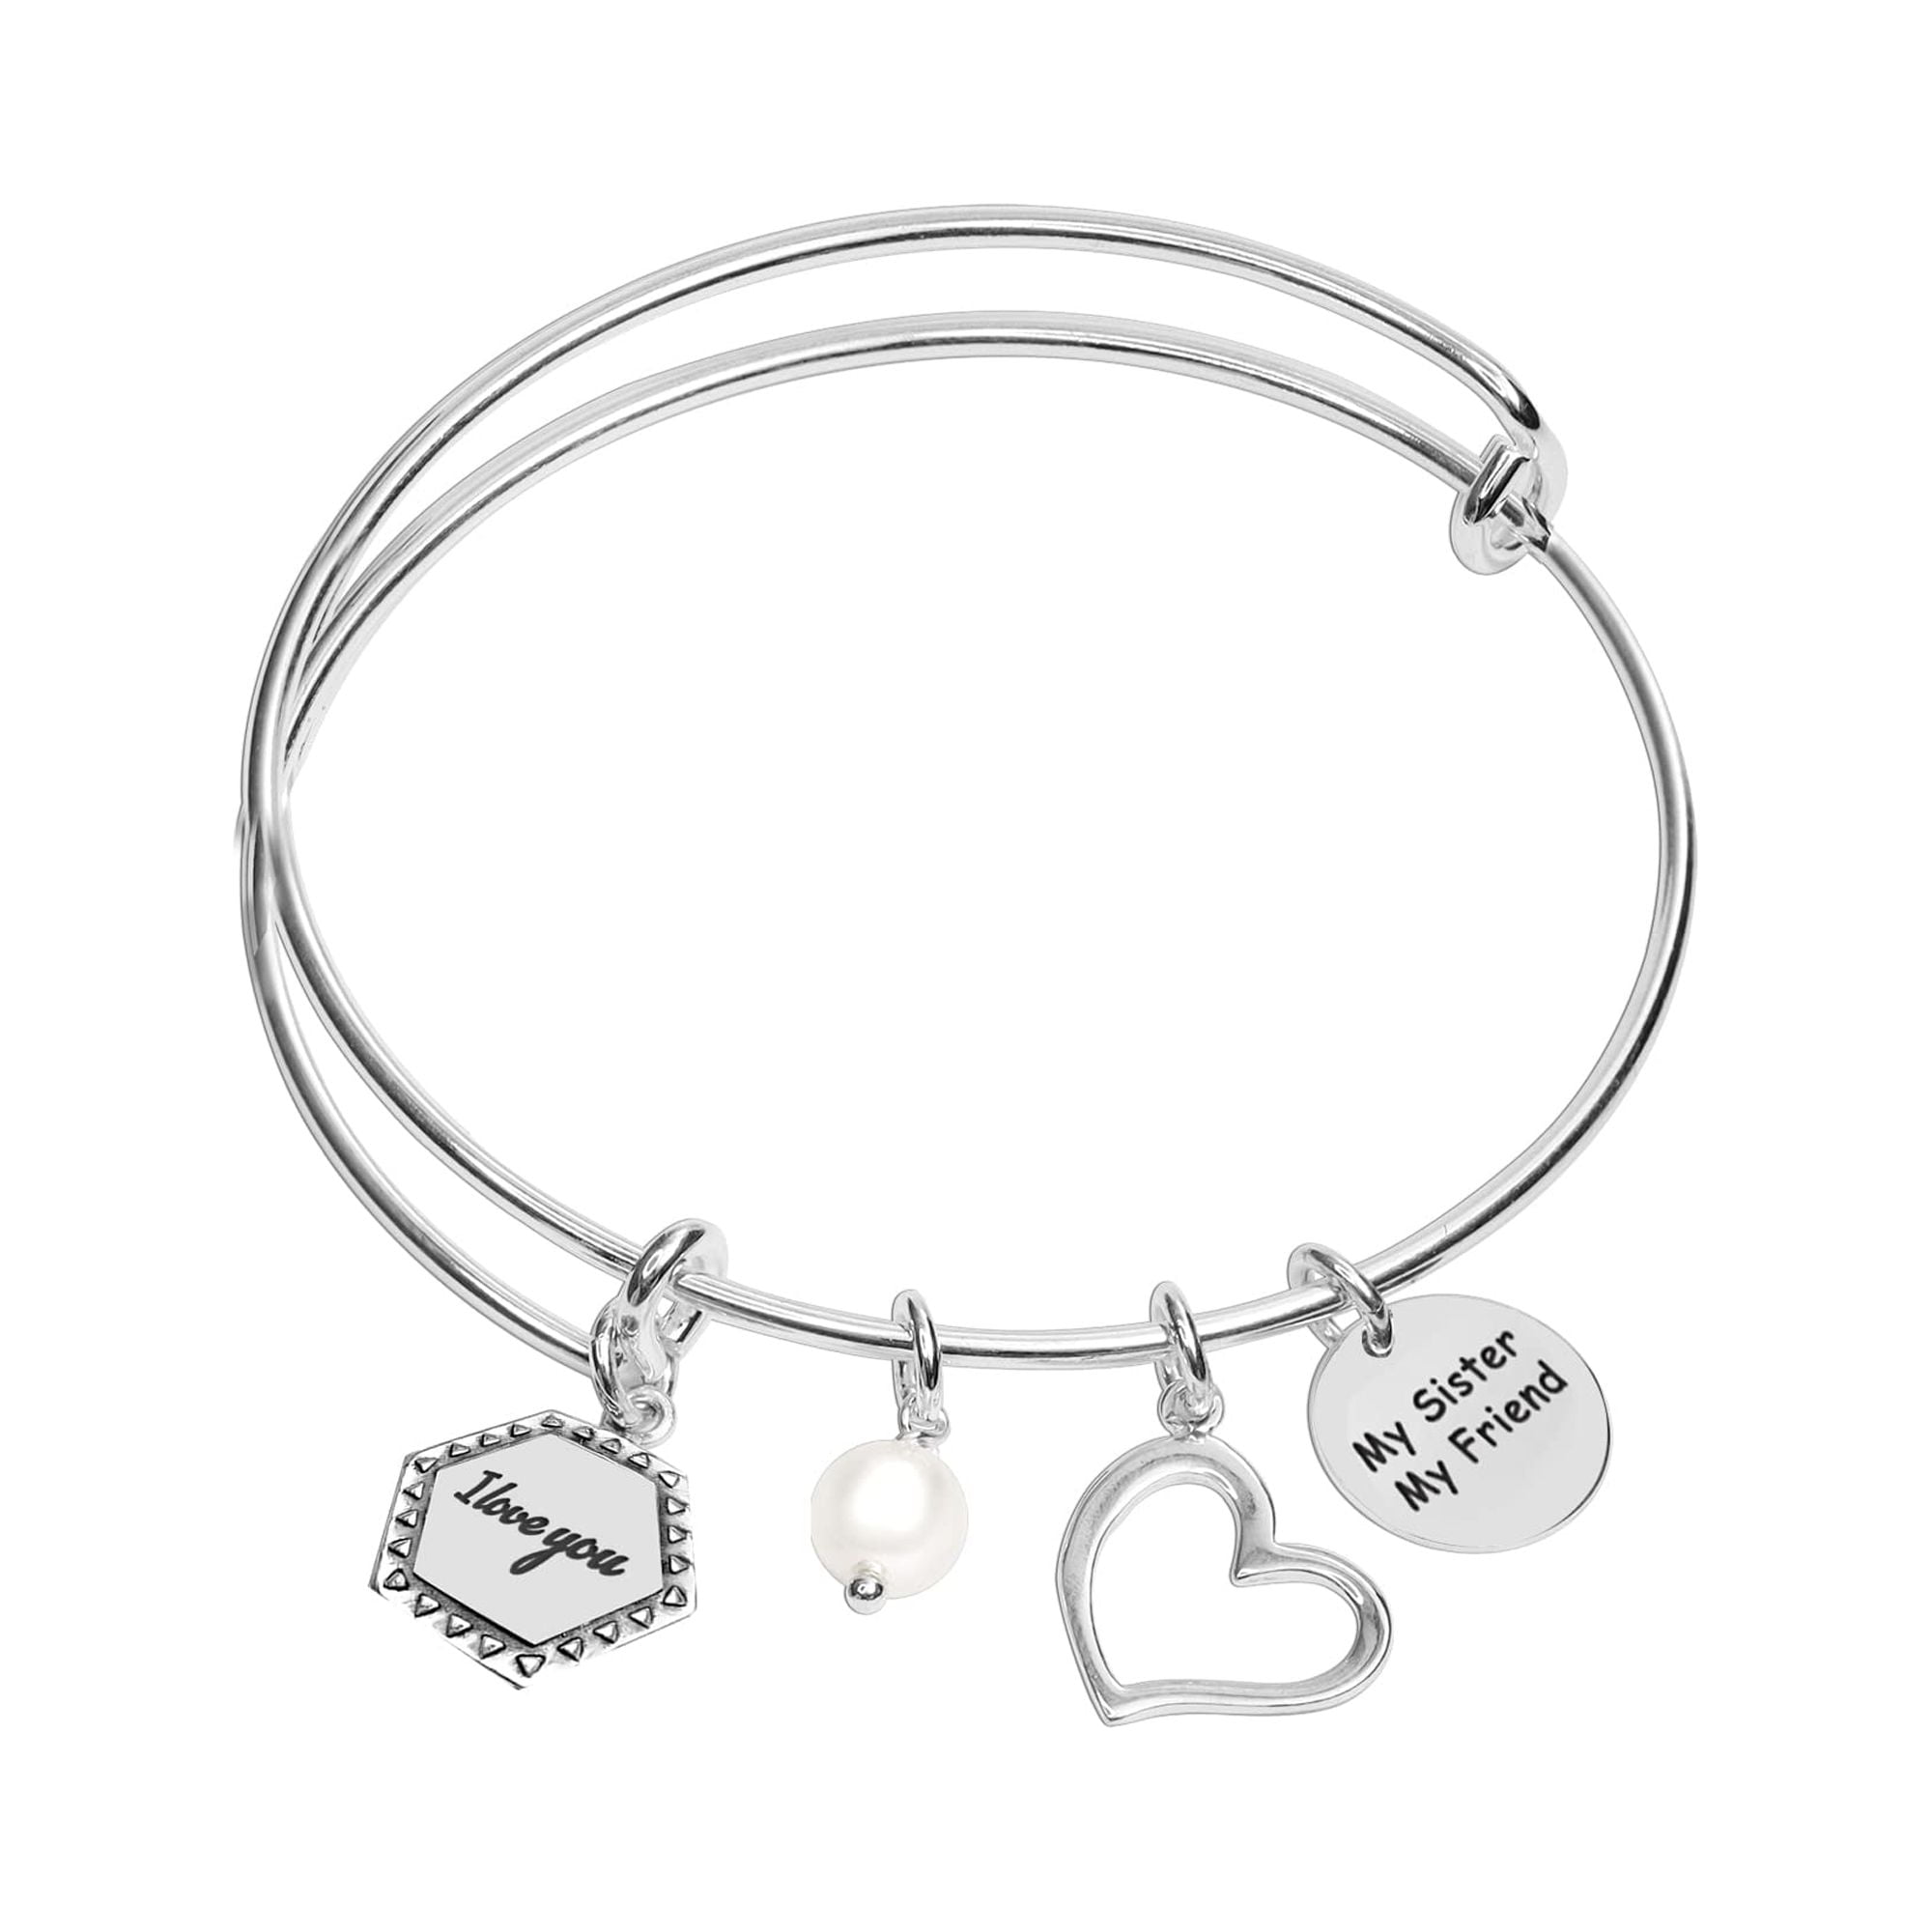 You Are Loved Yaya Jewelry Blessed Expandable Charm Bracelet Silver Adjustable Bangle One Size Fits All Gift Bling Crystal Heart